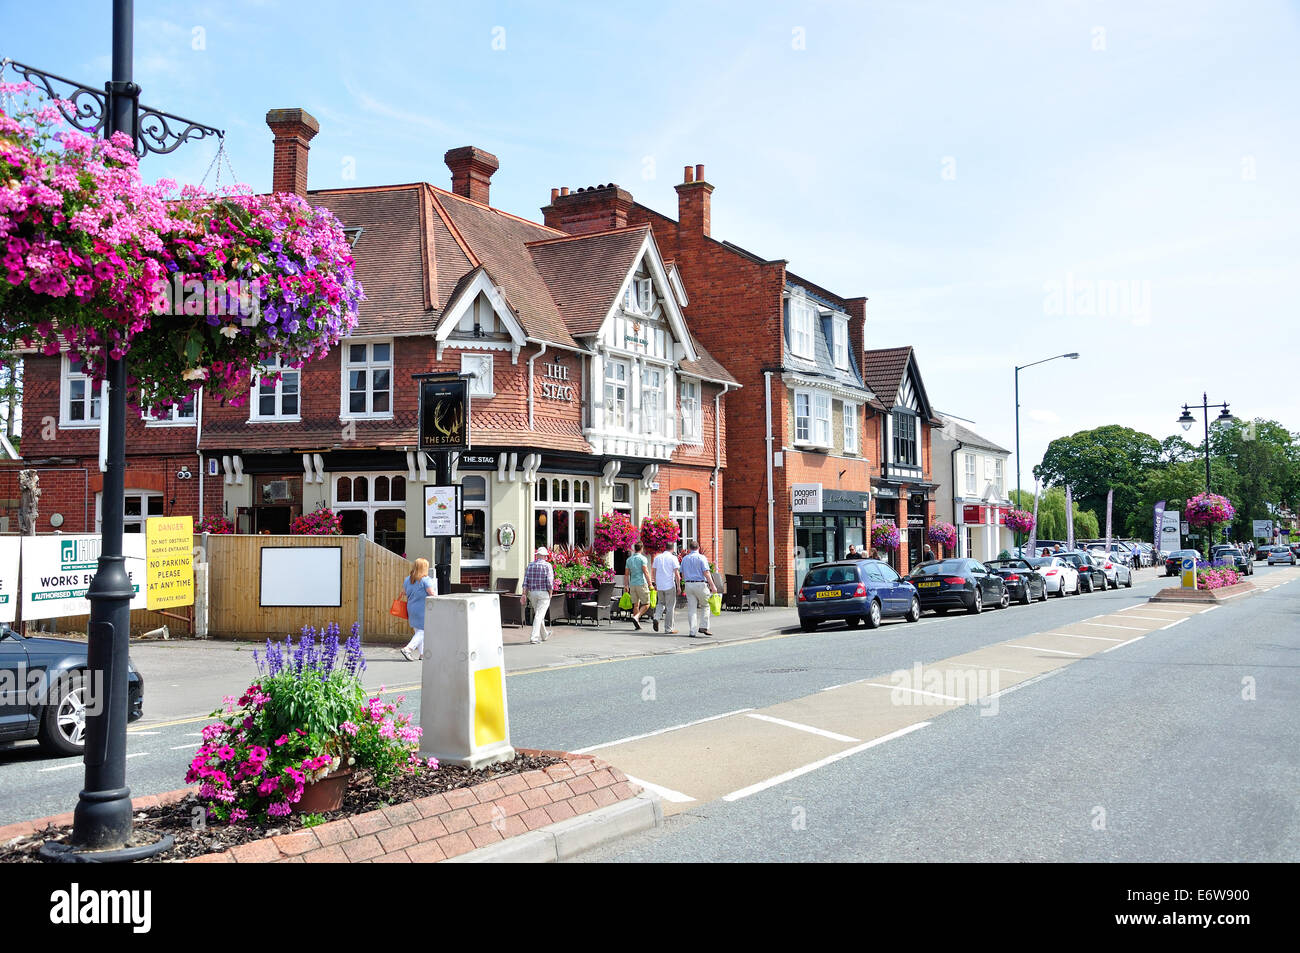 High Street, l'Ascot, Berkshire, Angleterre, Royaume-Uni Banque D'Images